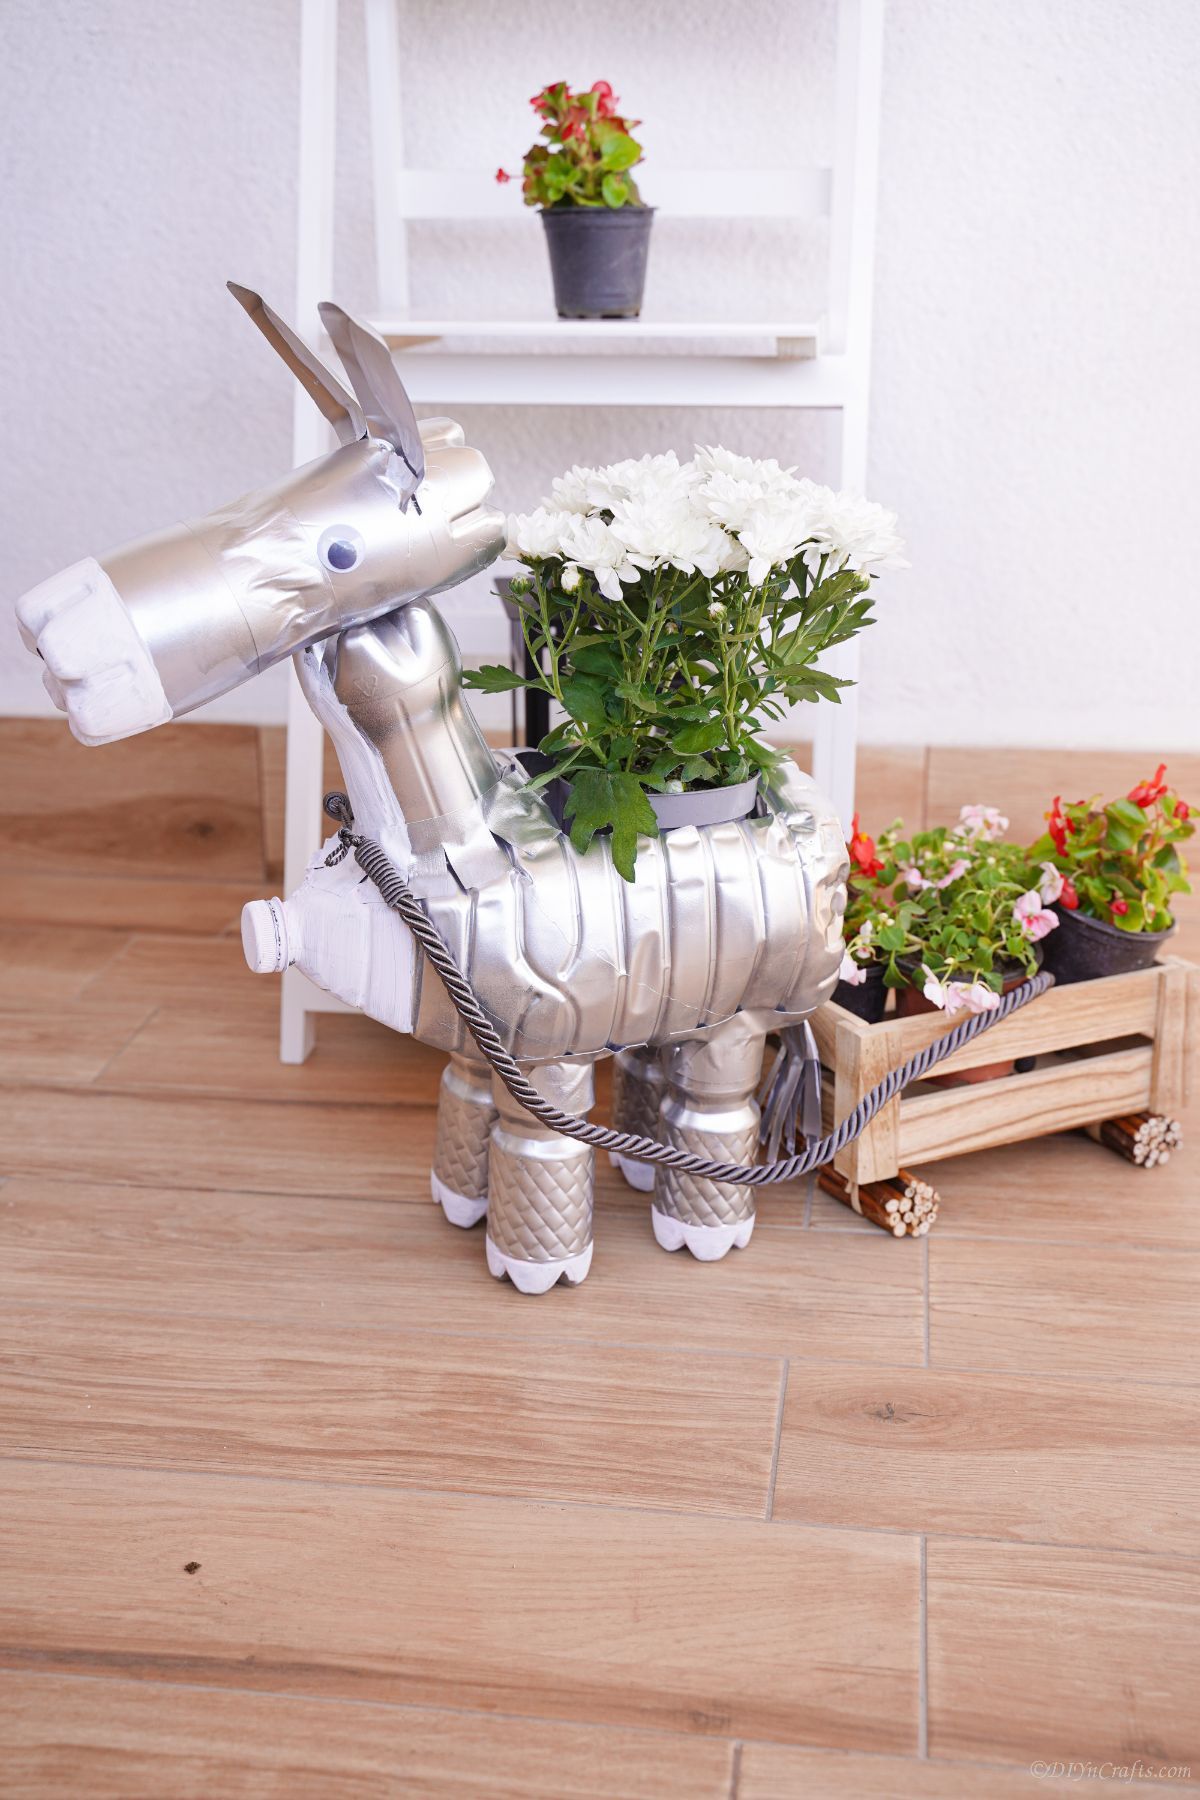 silver donkey planter on table in front of white shelf